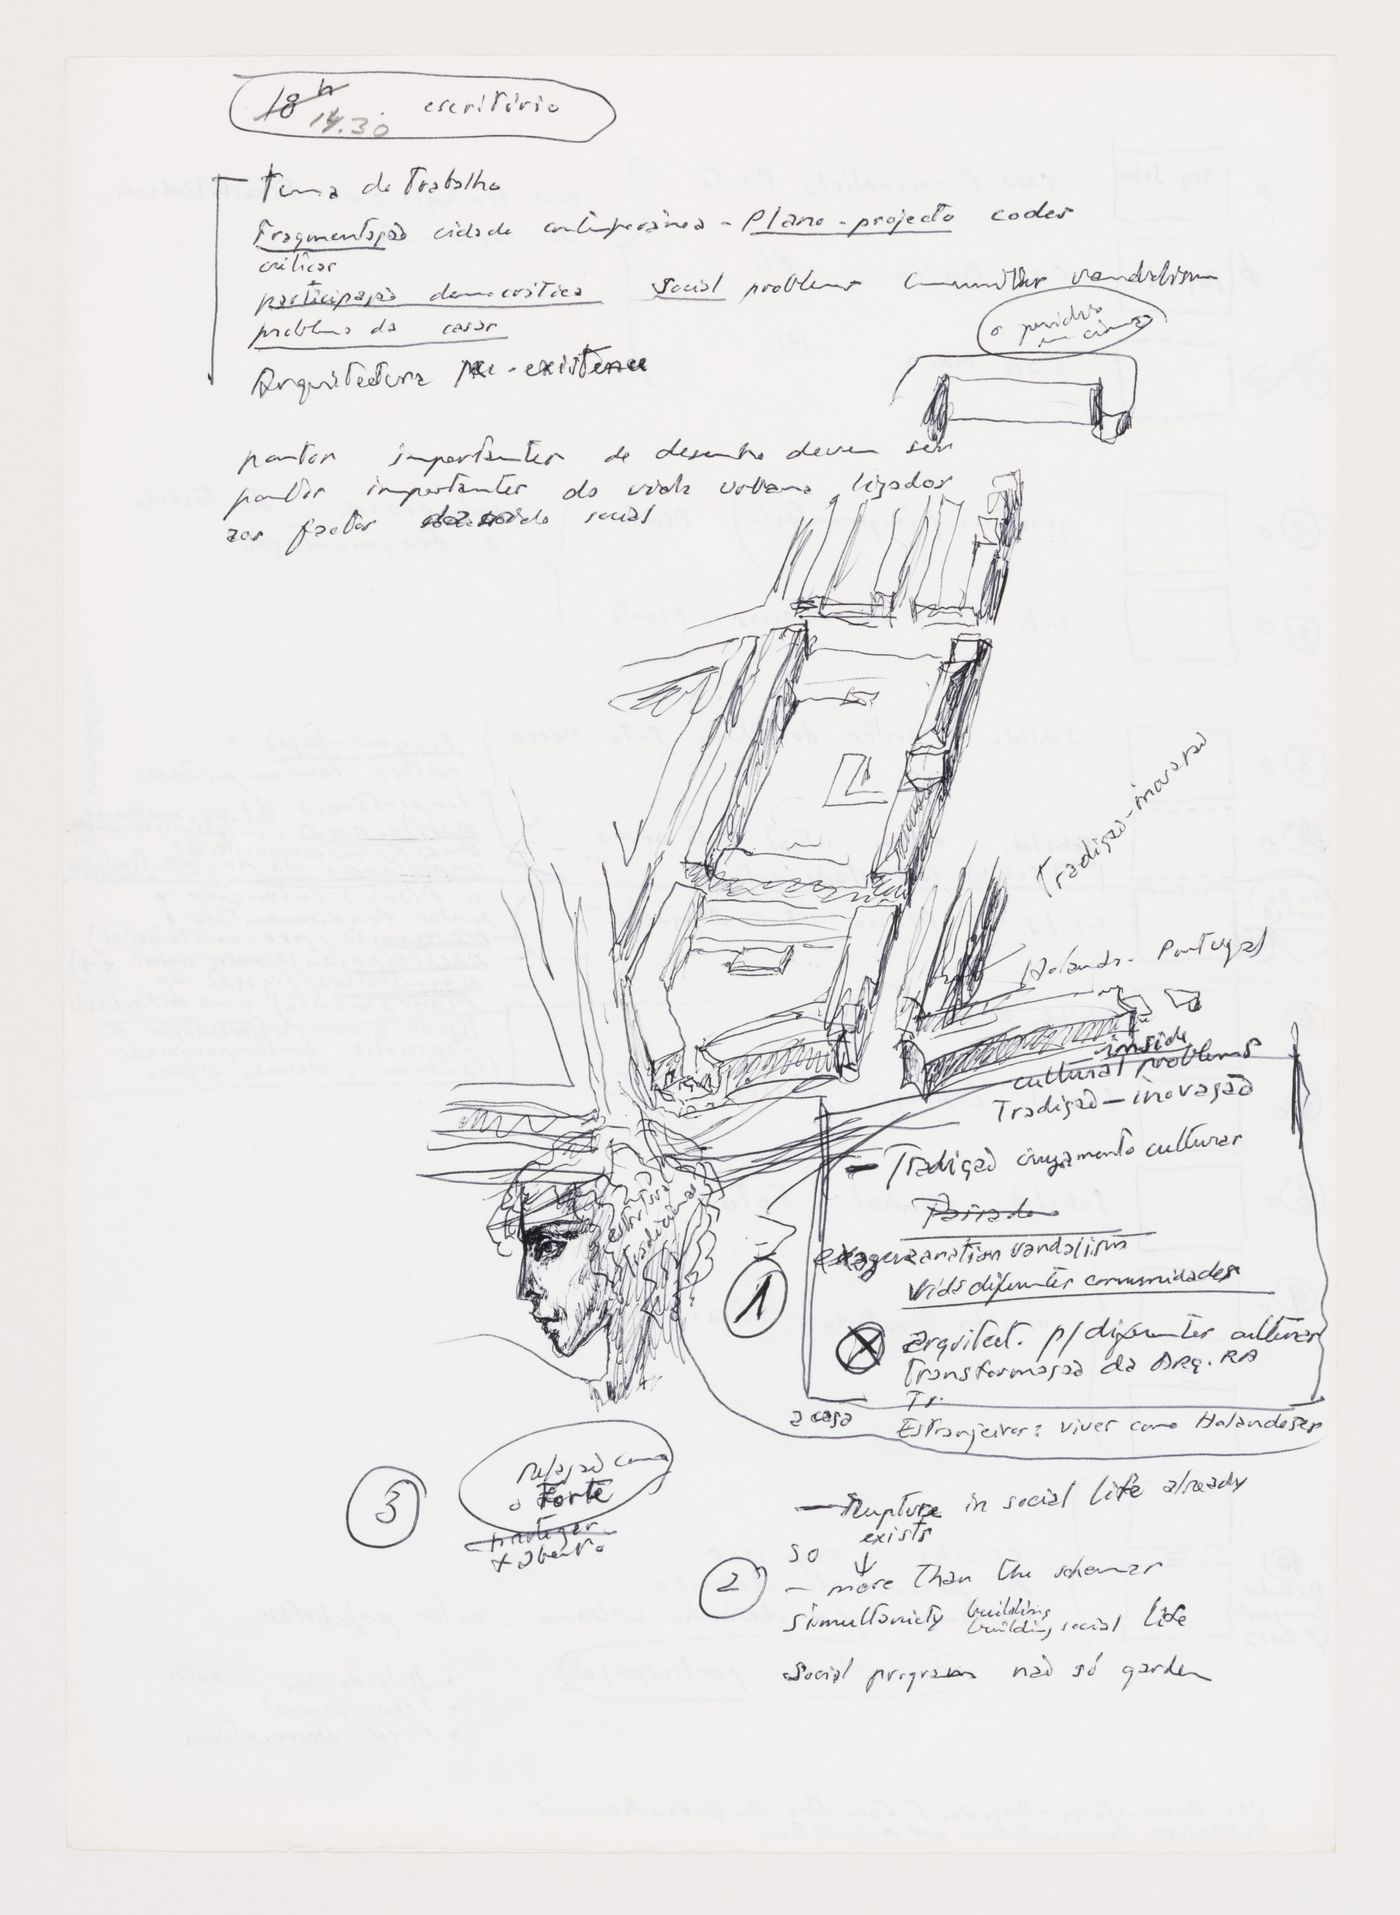 Sketch of neighbourhood block structure with notes on project brief, Punt en Komma, The Hague